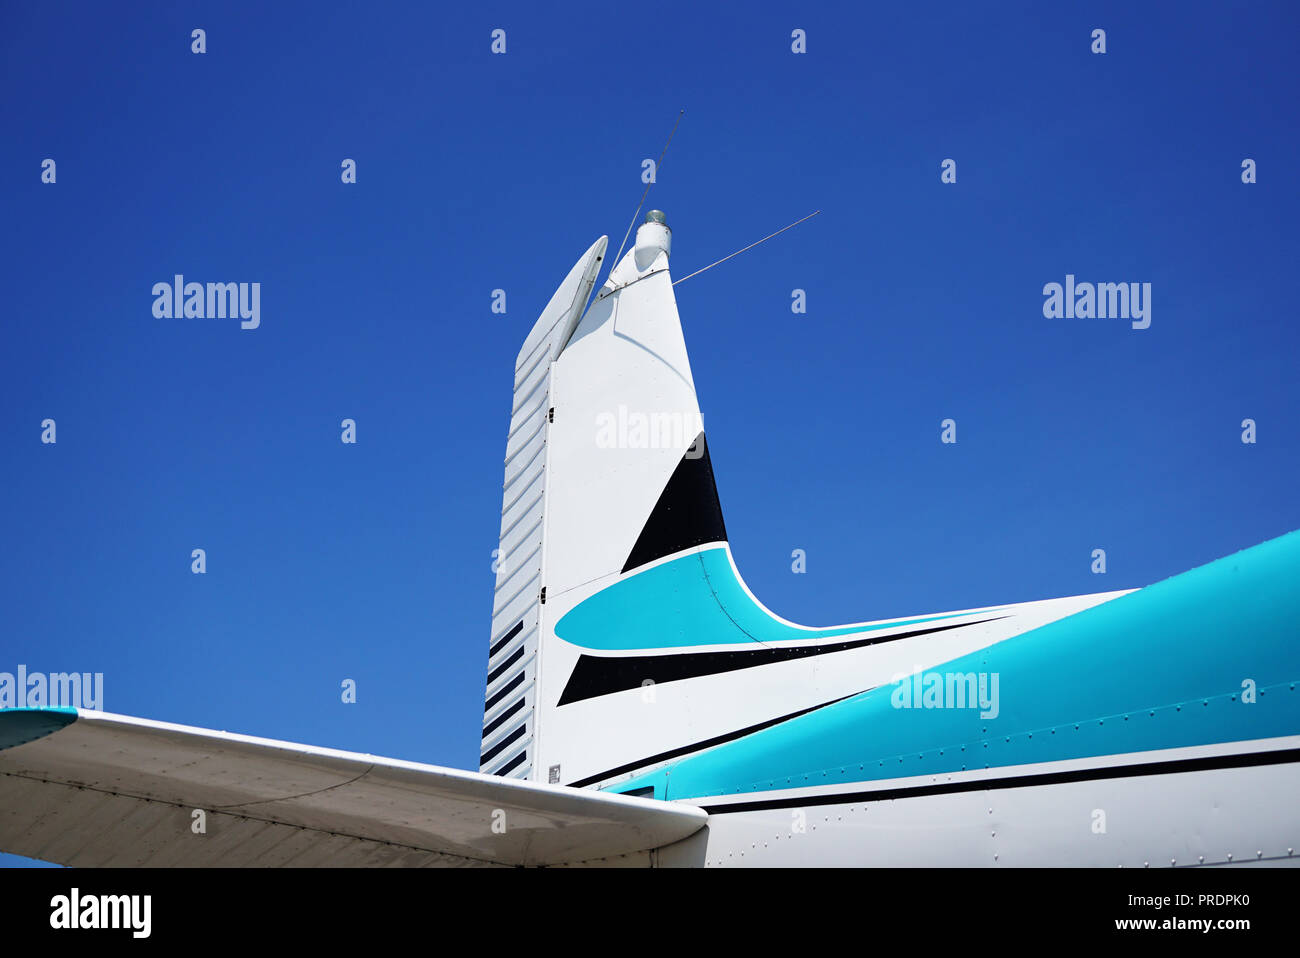 Tail of an Airplane against the Blue Sky. Airplane on the Backgroud Blue Sky with Blue Sky view. Stock Photo